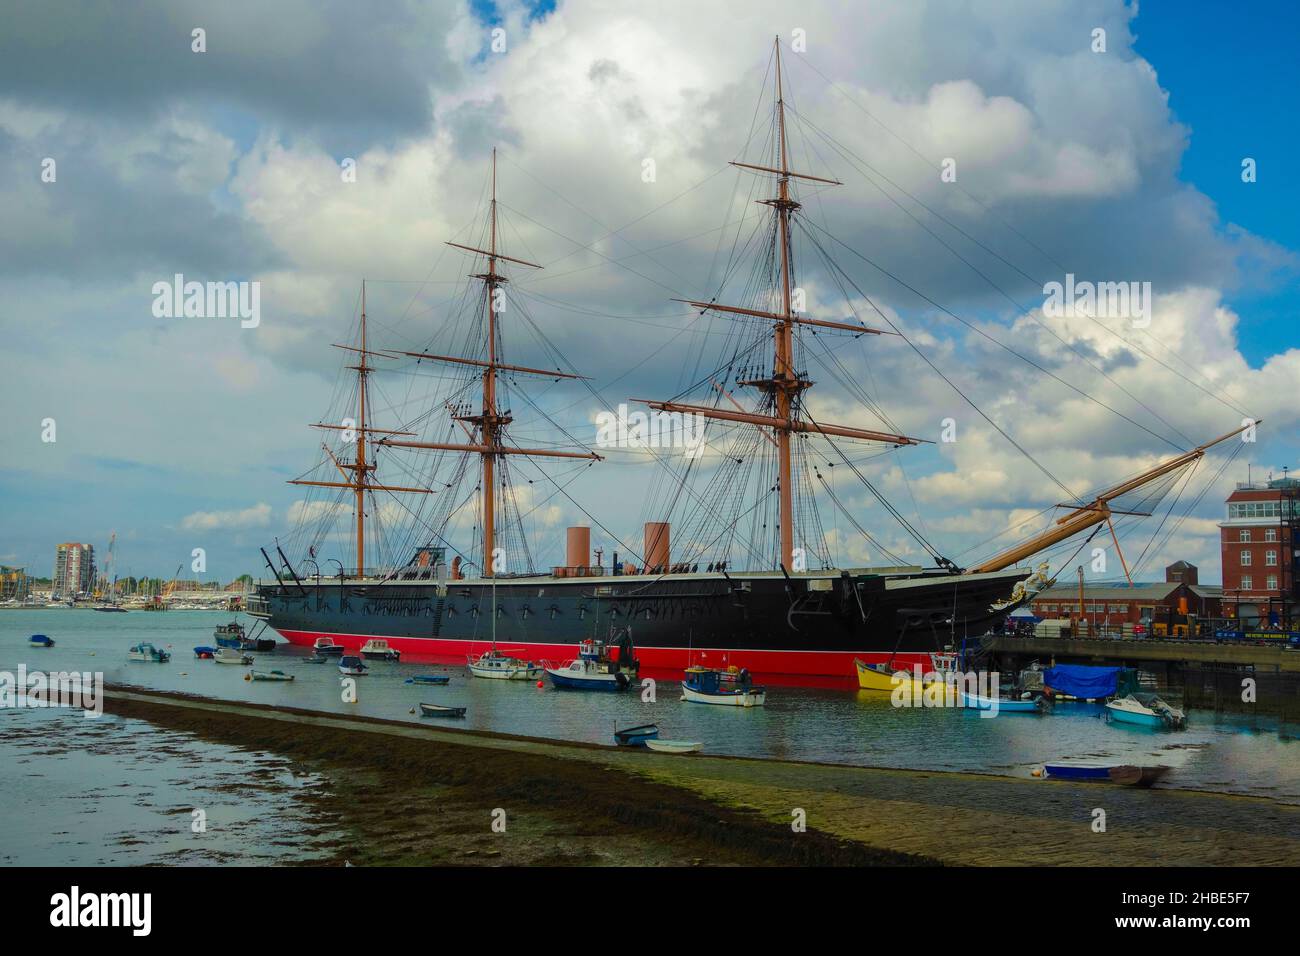 HMS Warrior is a 40-gun steam-powered armoured frigate built for the Royal Navy in 1859–1861 She was the first armour-plated, iron-hulled warships lau Stock Photo